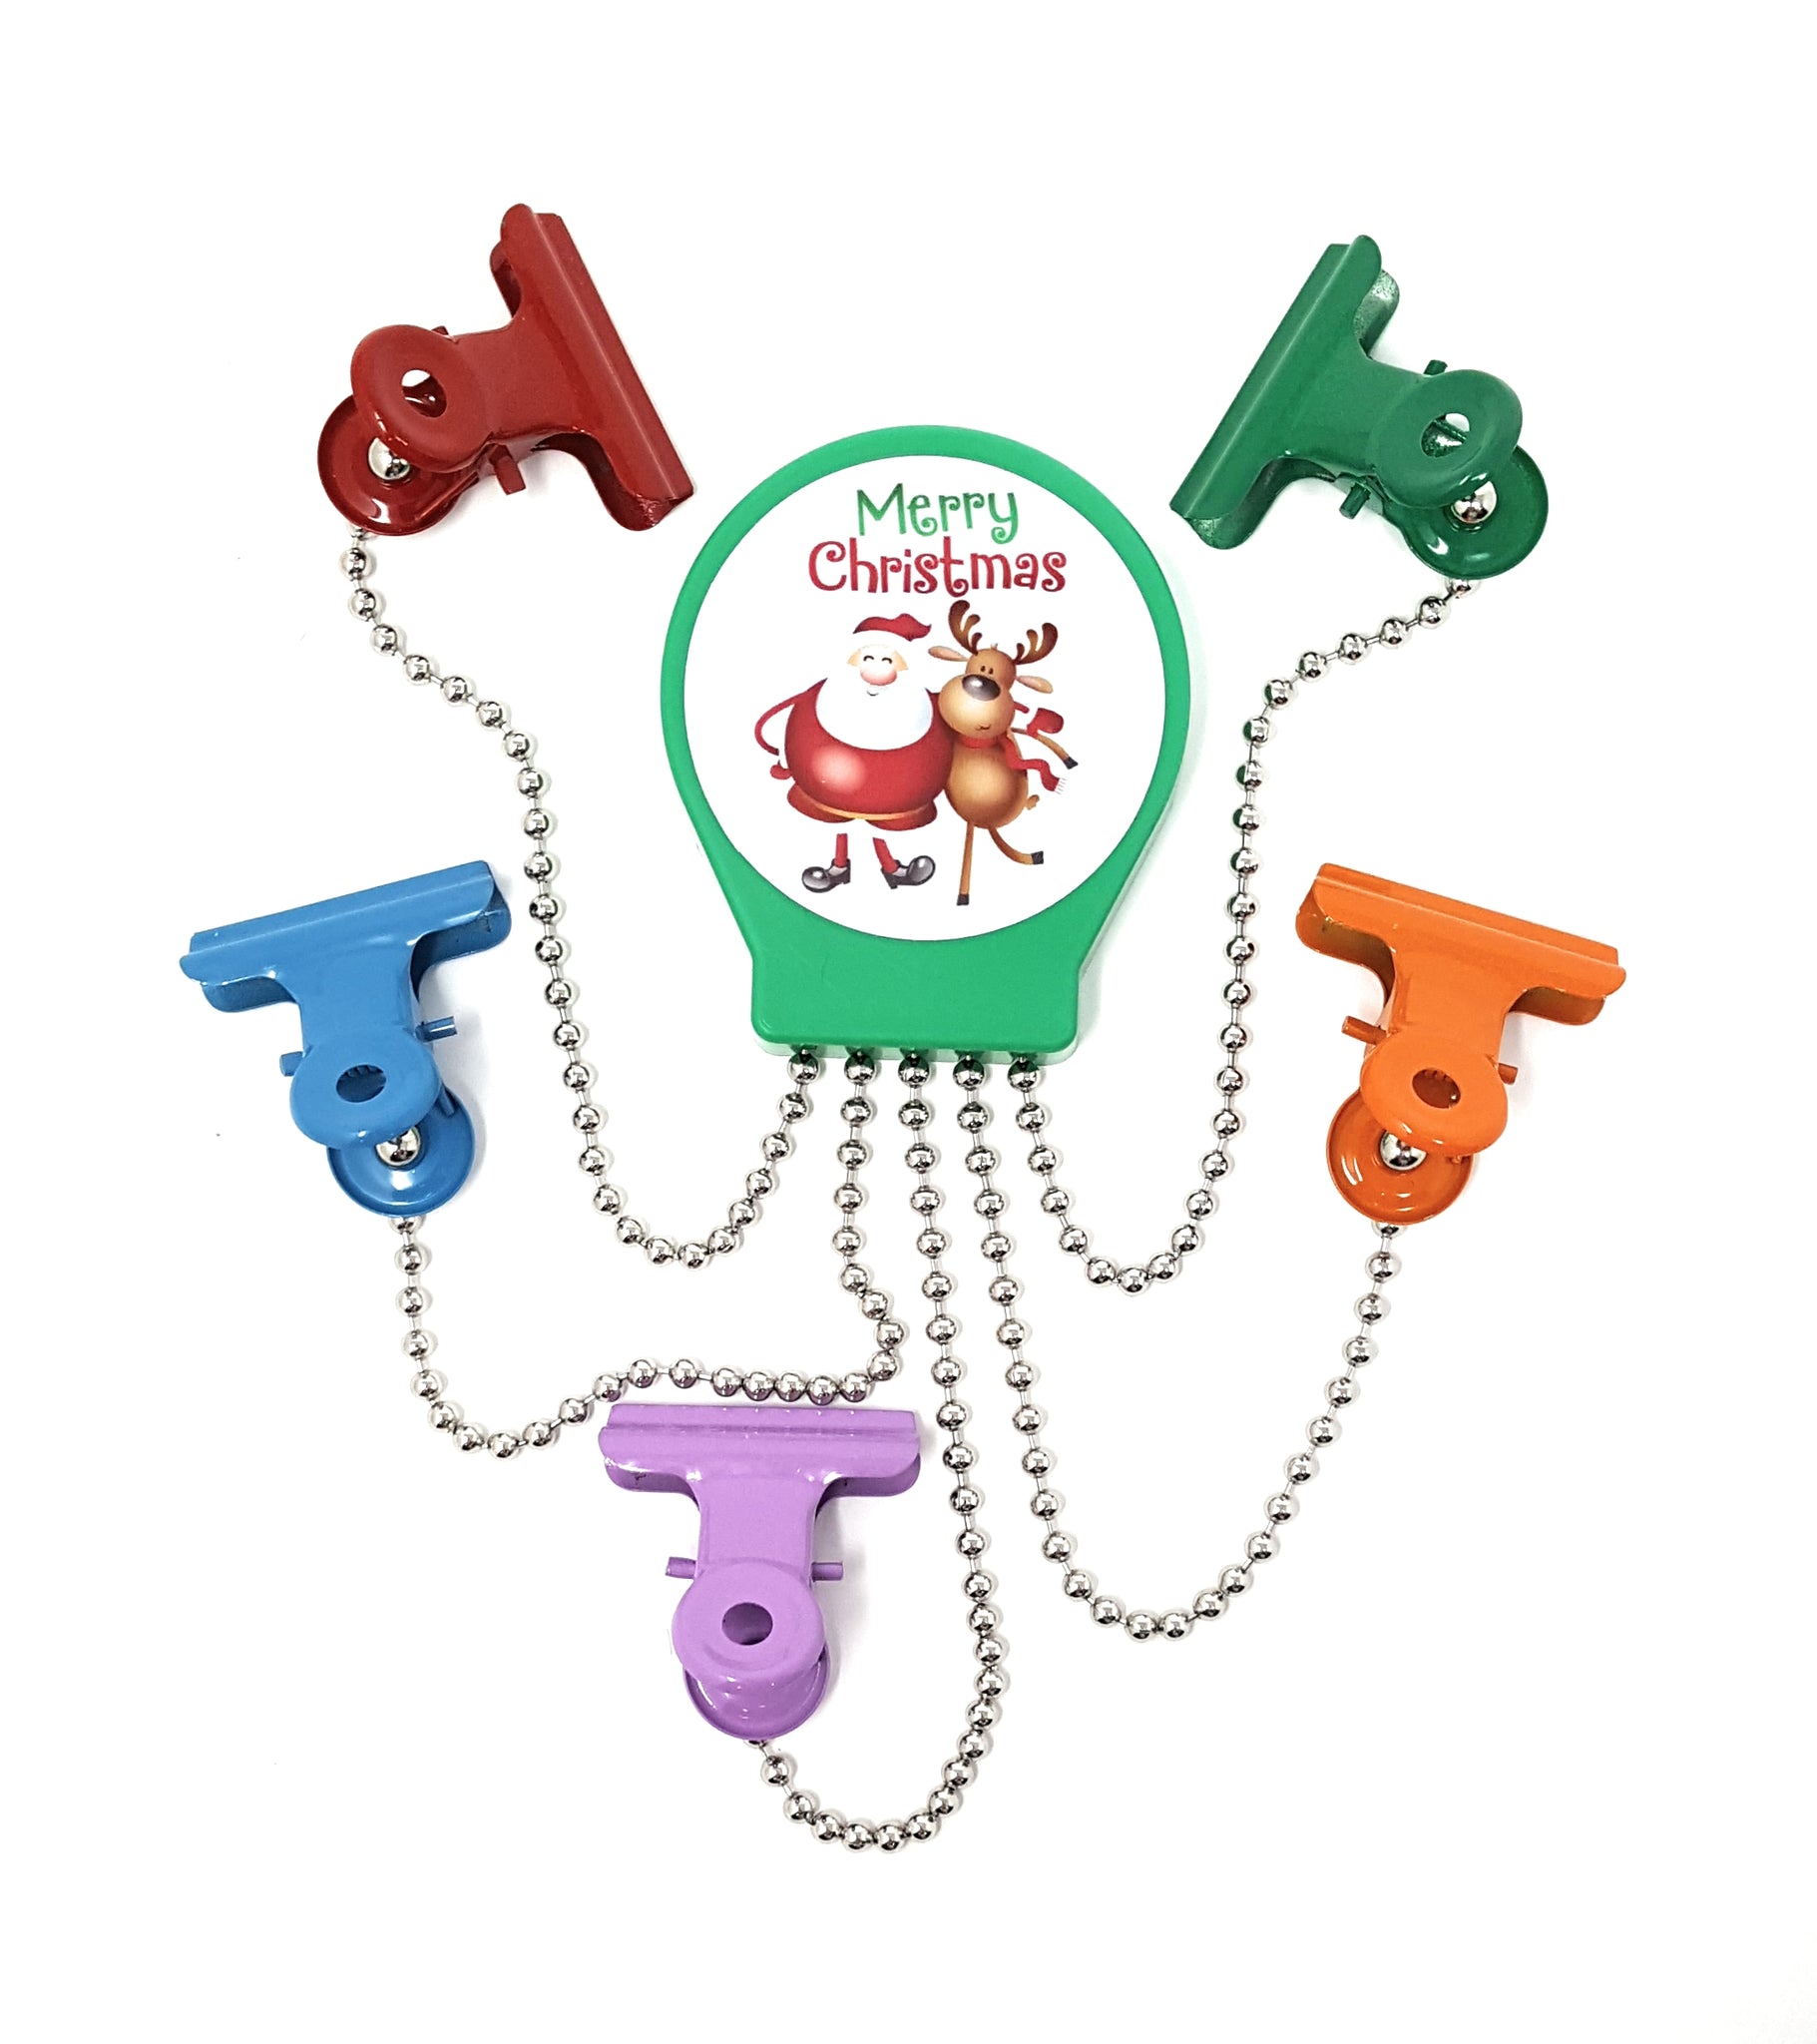 OctoClip Refrigerator Magnet - Merry Christmas with Multi Colored Clips